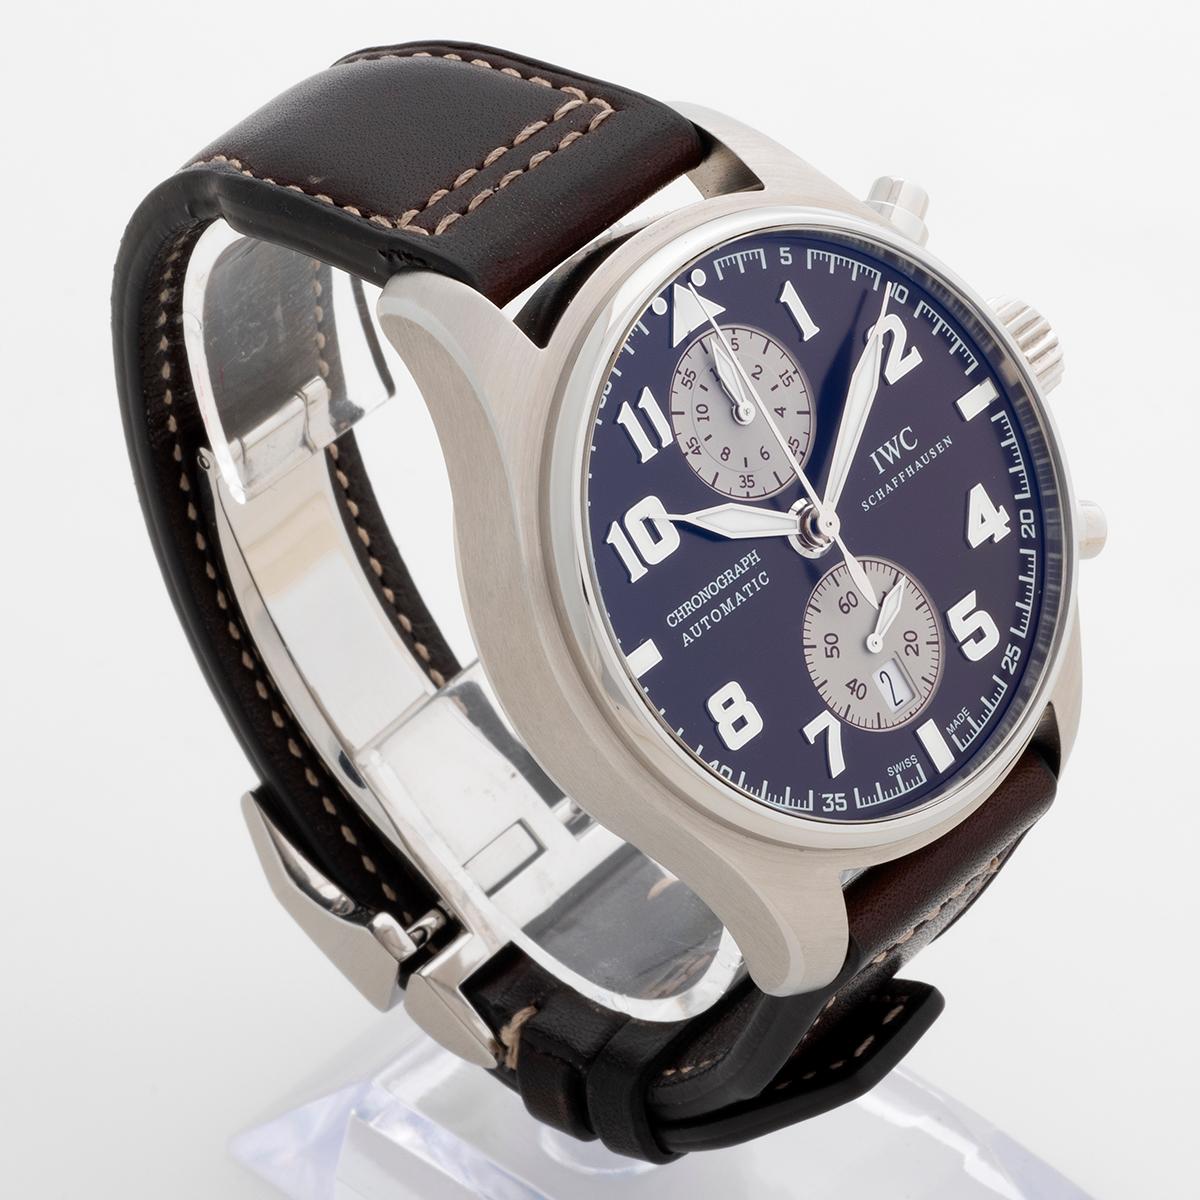 Our rare special edition IWC Pilot Chronograph, Edition Saint Antoine D'Exupery, reference IW387806, features a 43mm stainless steel case with brown sunray dial and leather strap with deployant clasp. This reference distinguishes itself with an in